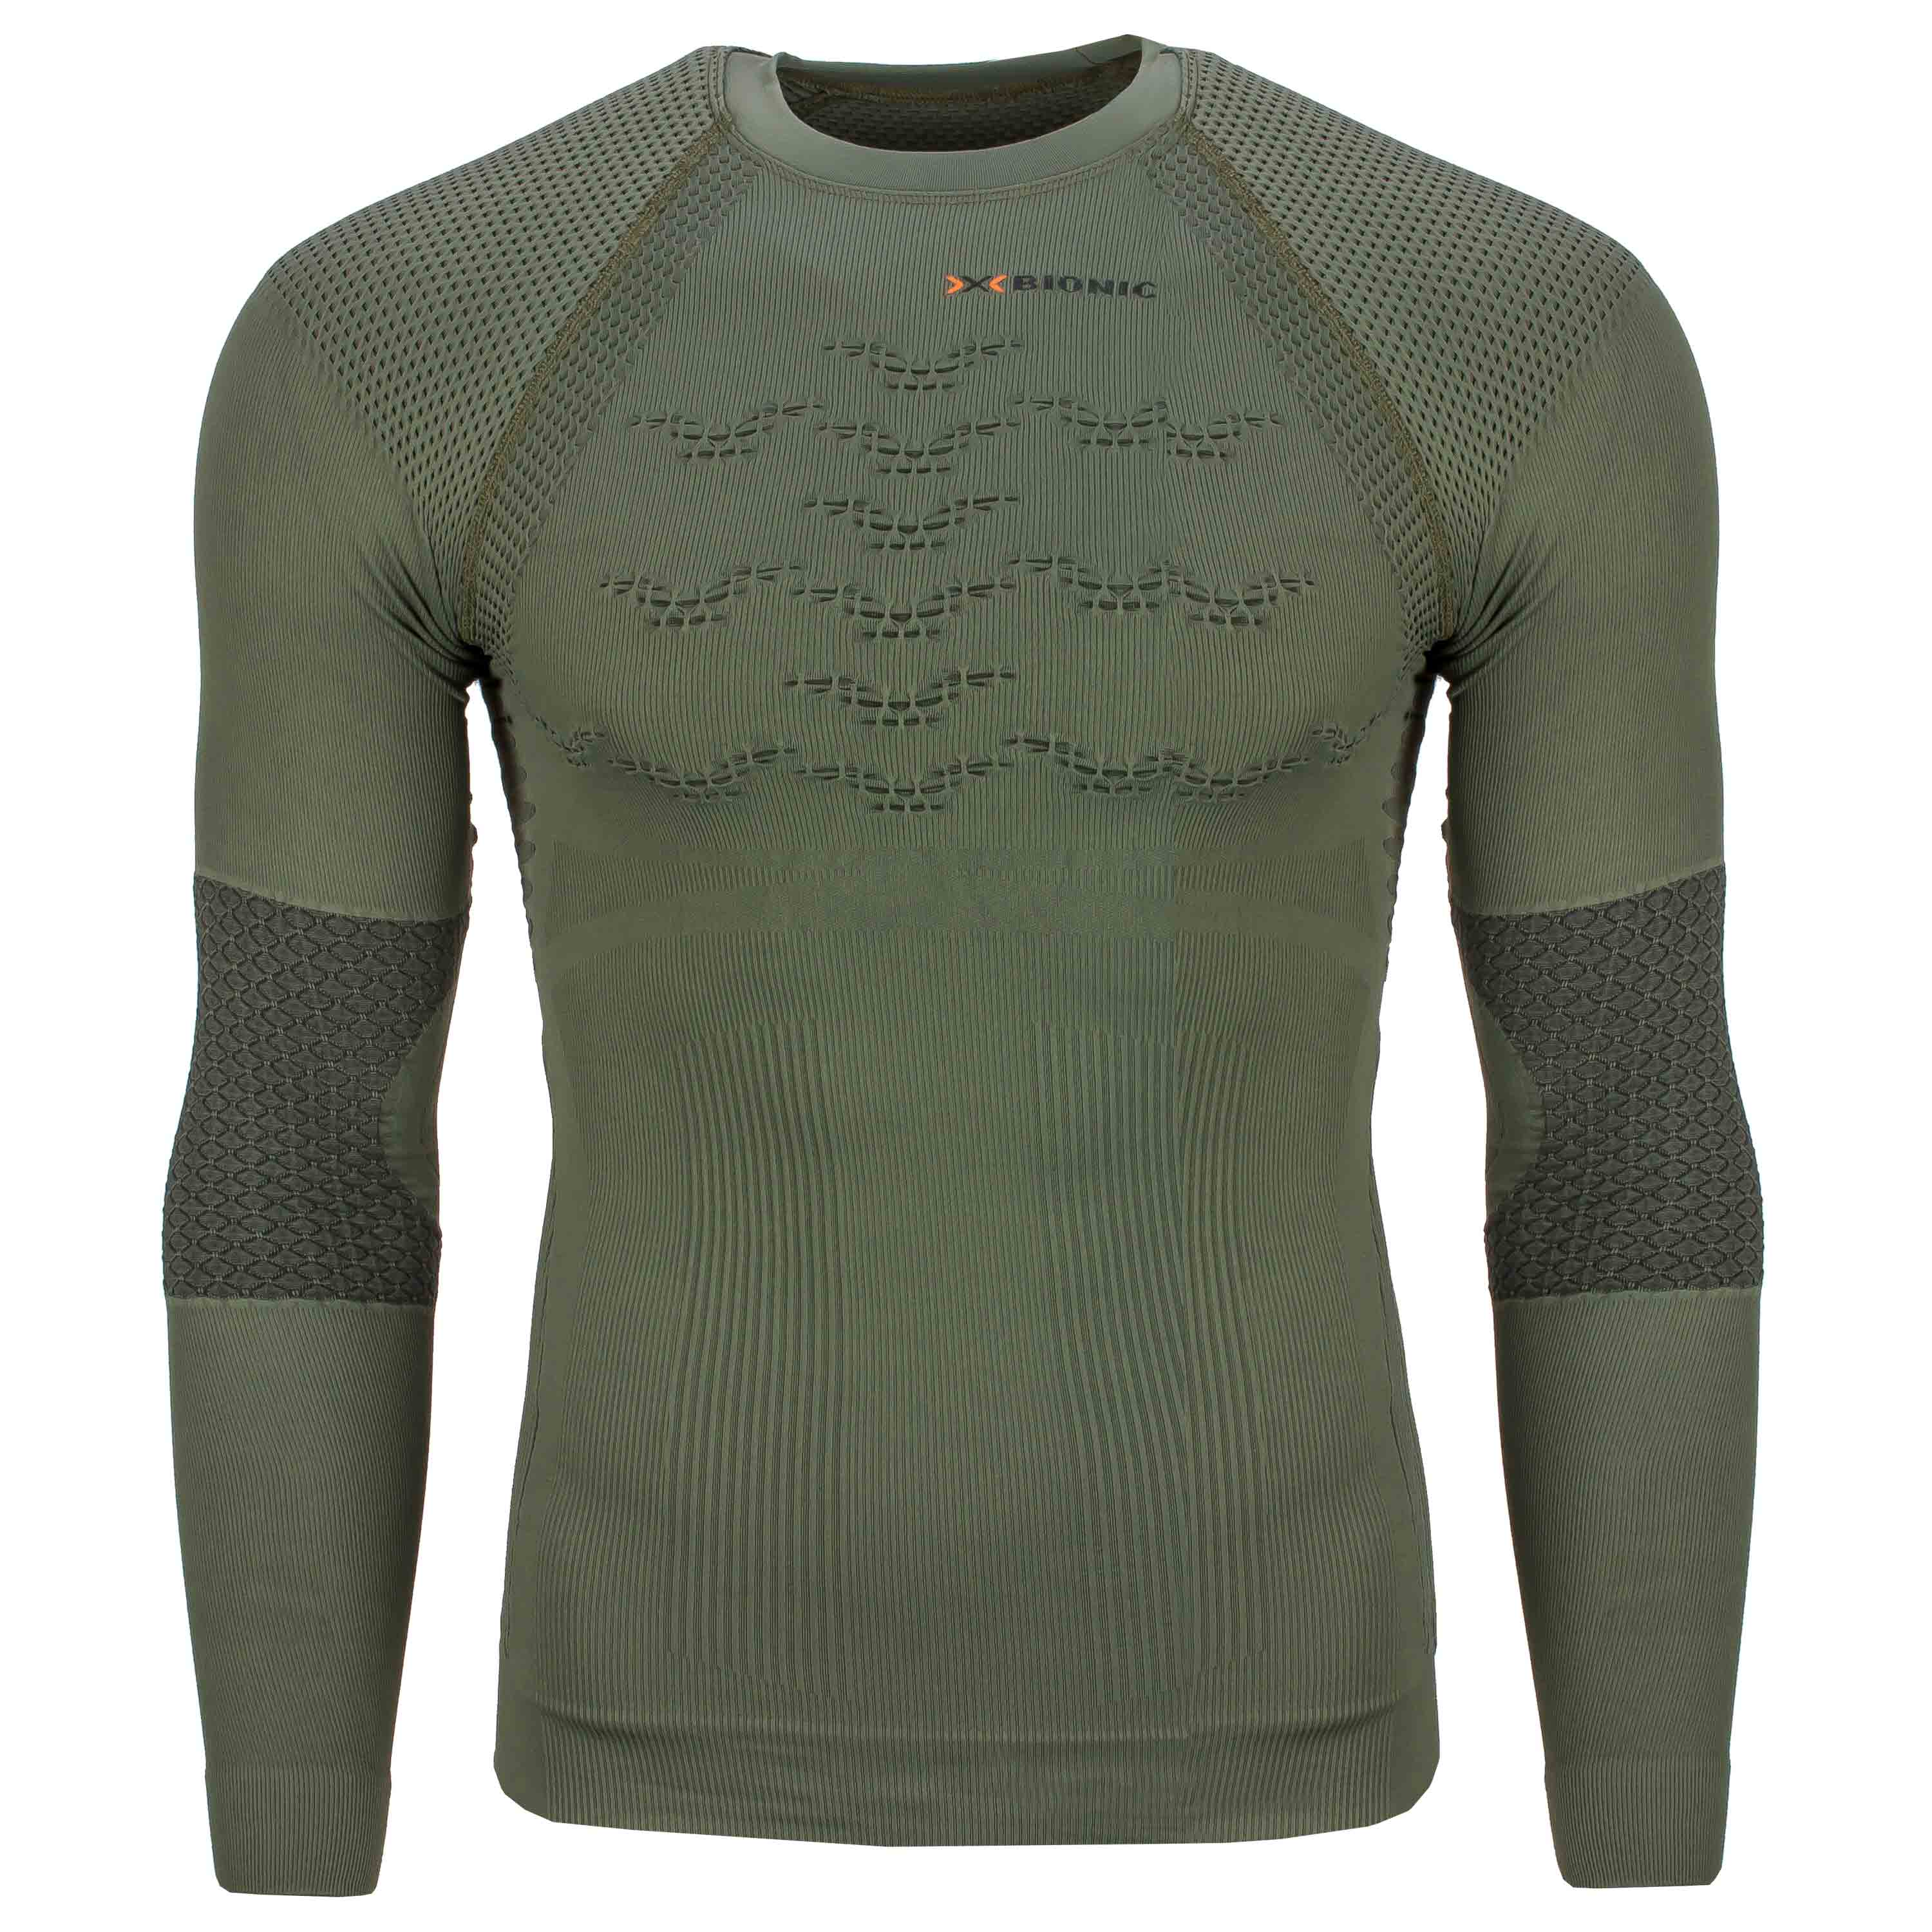 Purchase the X-Bionic T-Shirt Hunt Energizer 4.0 LG SL olive gre